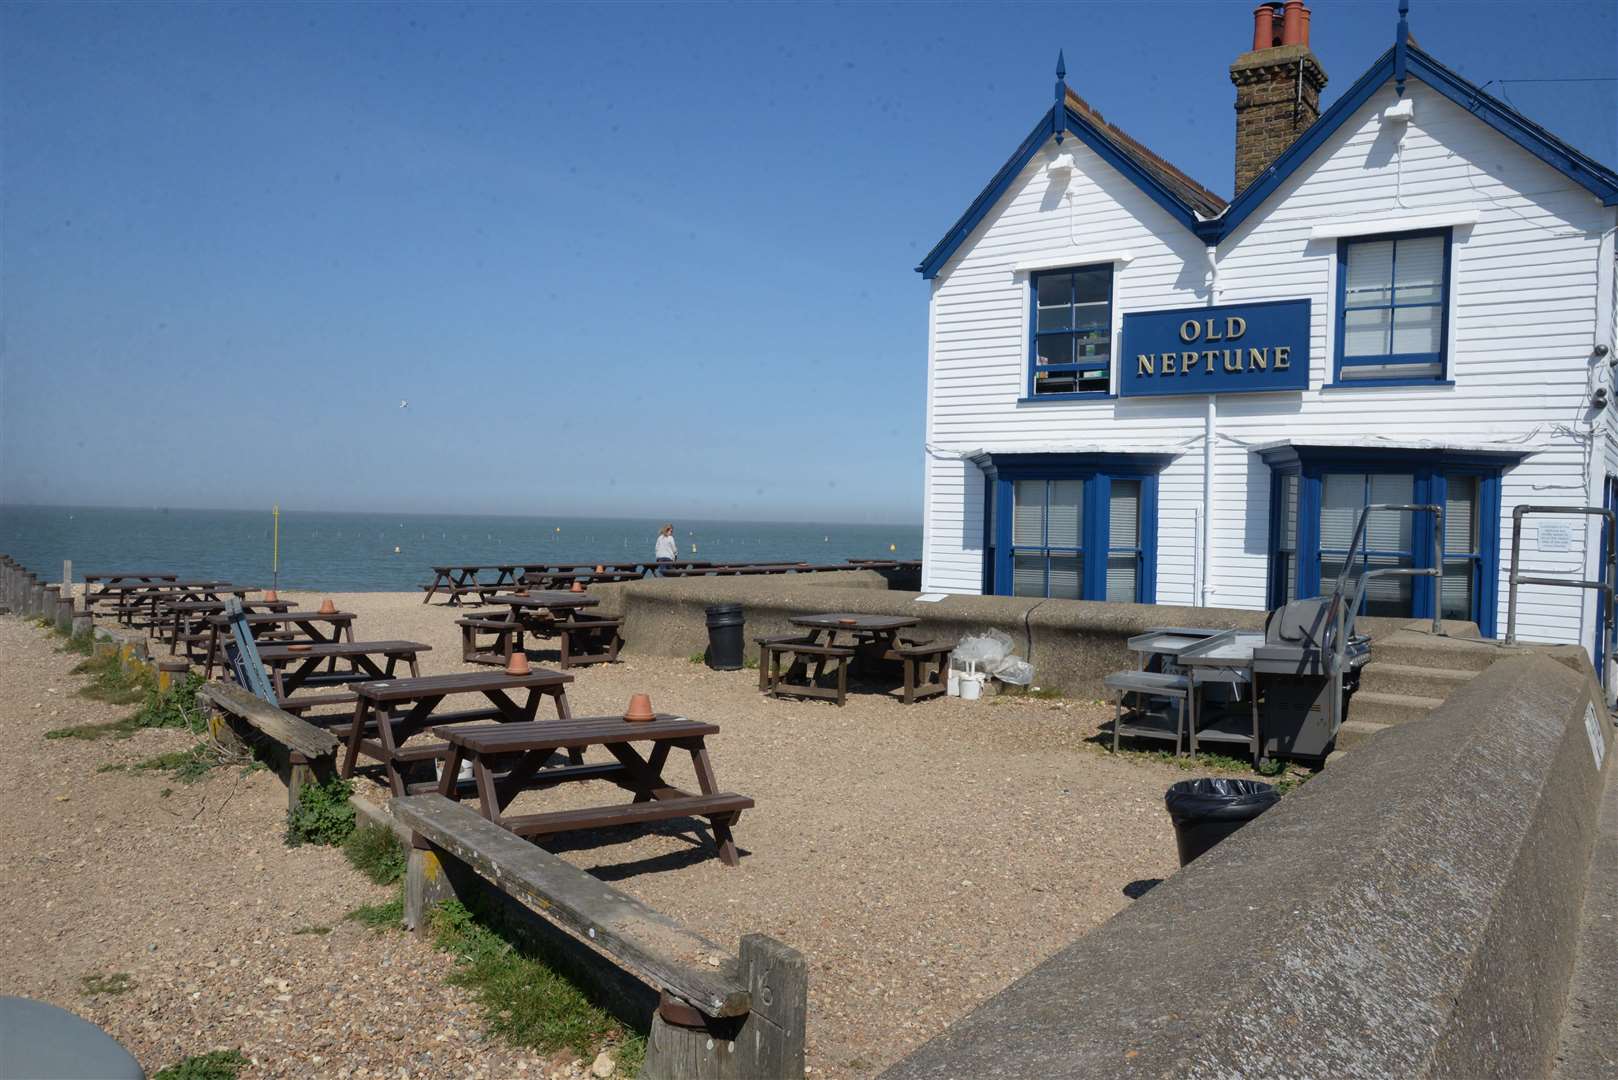 The Old Neptune pub on Whitstable's West Beach